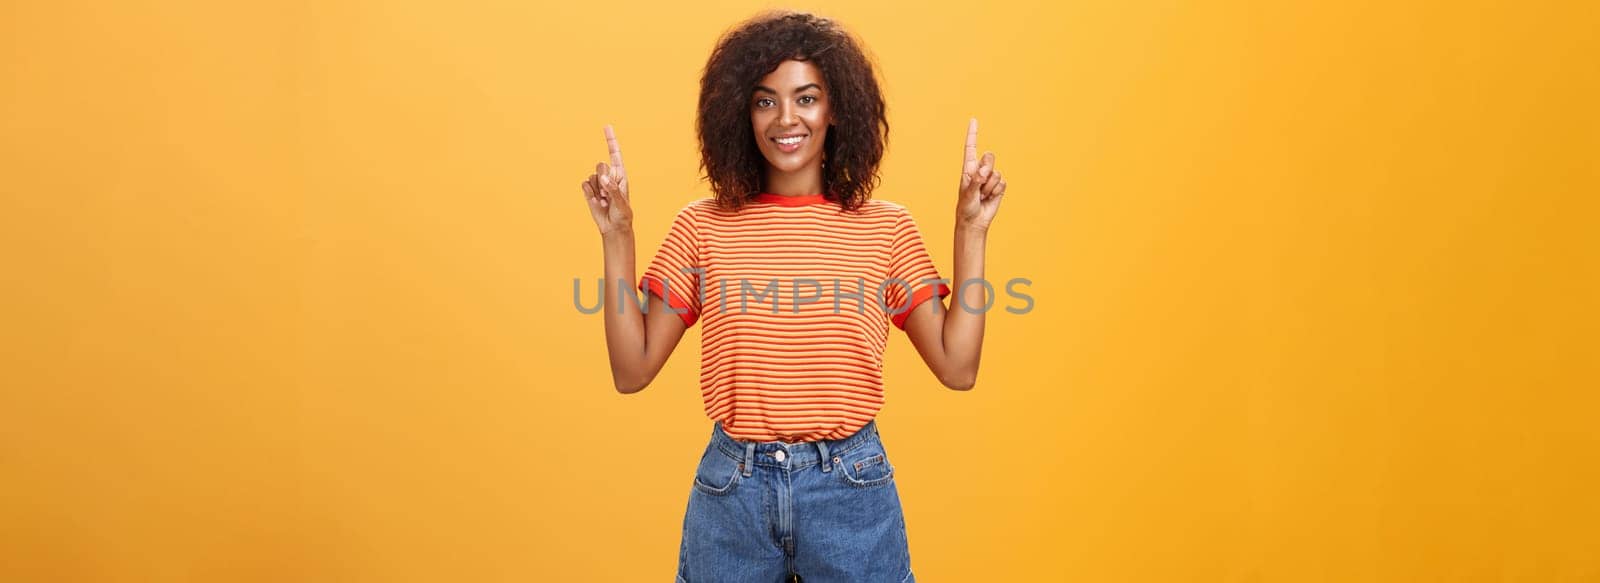 Looking only up and forward. Optimistic ambitious stylish dark-skinned female student in striped cool t-shirt and shorts raising hands pointing upwards and smiling friendly over orange wall.